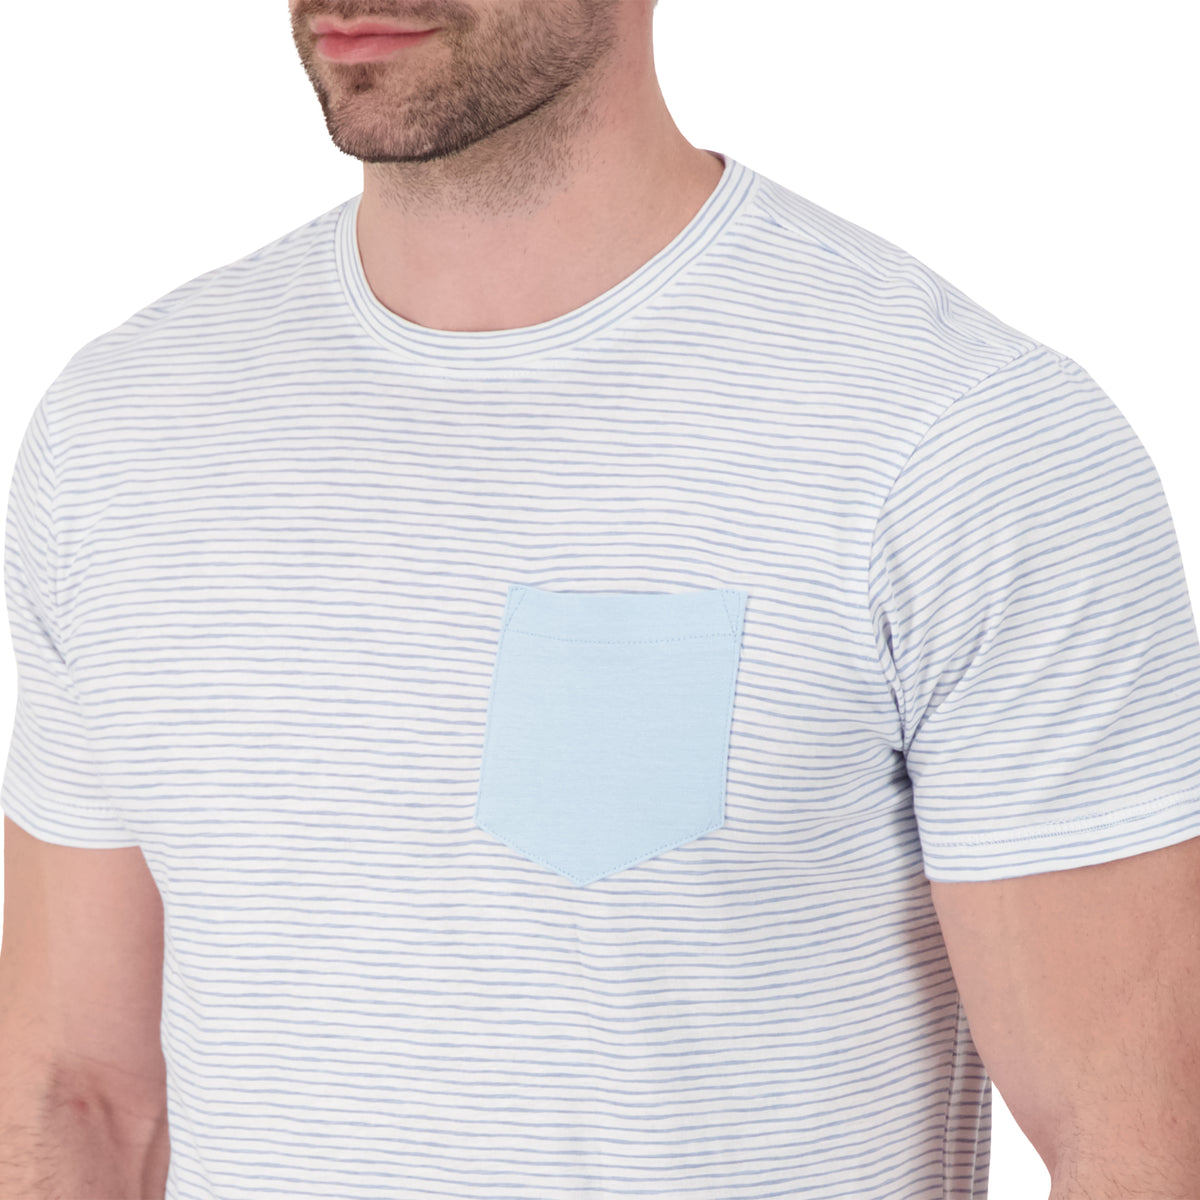 Model Front Close Up View of Short Sleeve Shirt with Stripes Print in Blue